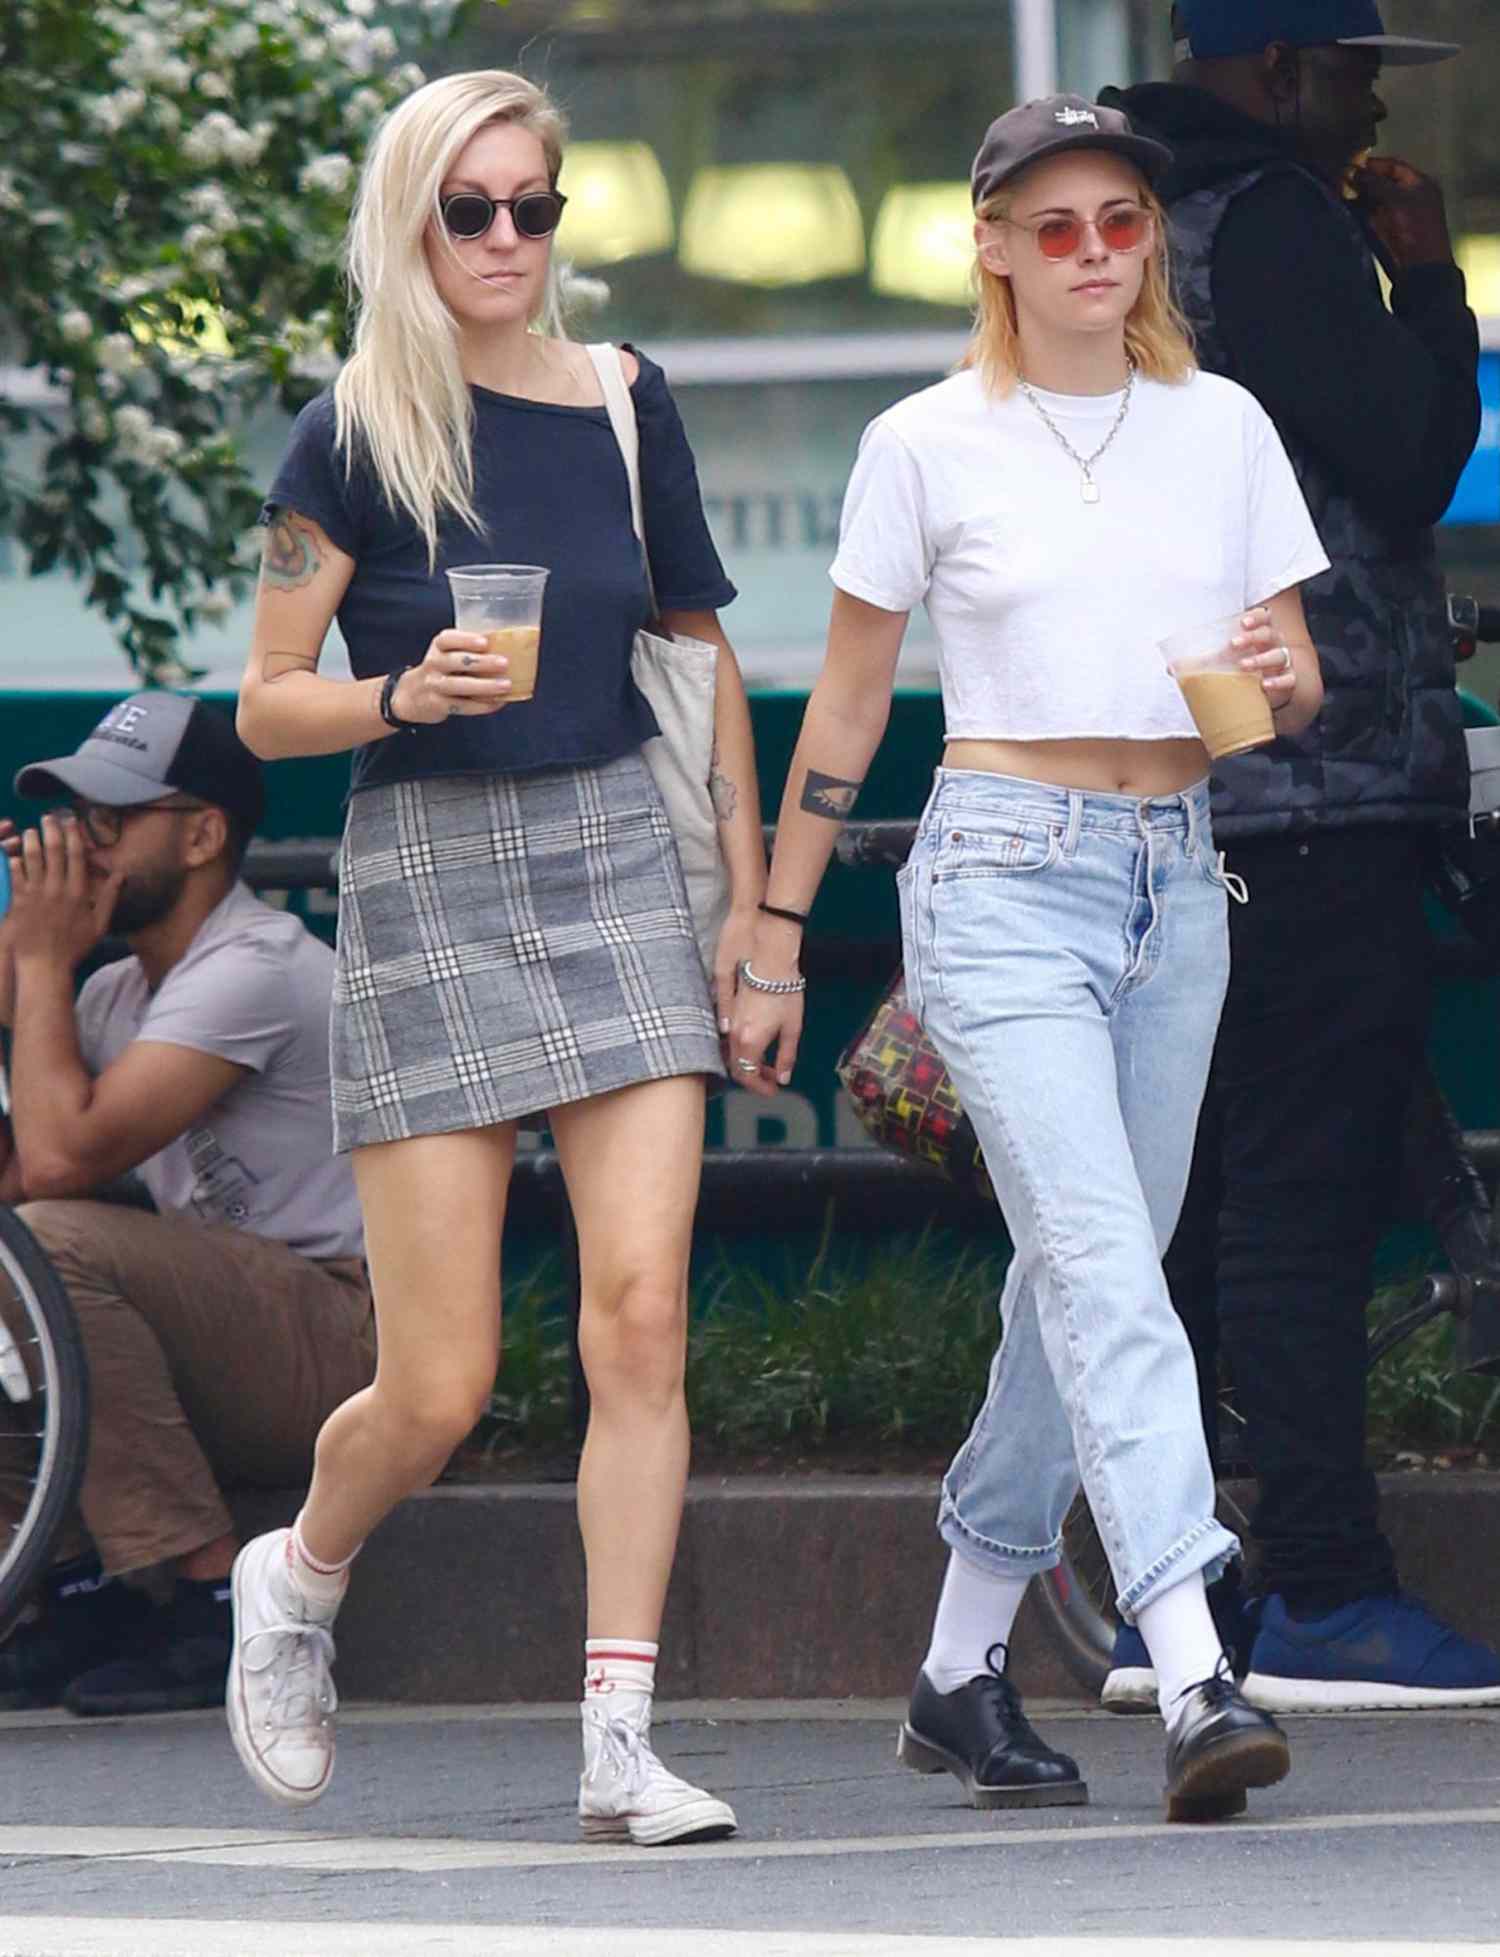 Kristen Stewart and girlfriend Dylan Meyer have an iced coffee run while out in Manhattan's Union Square Park. 11 Sep 2021